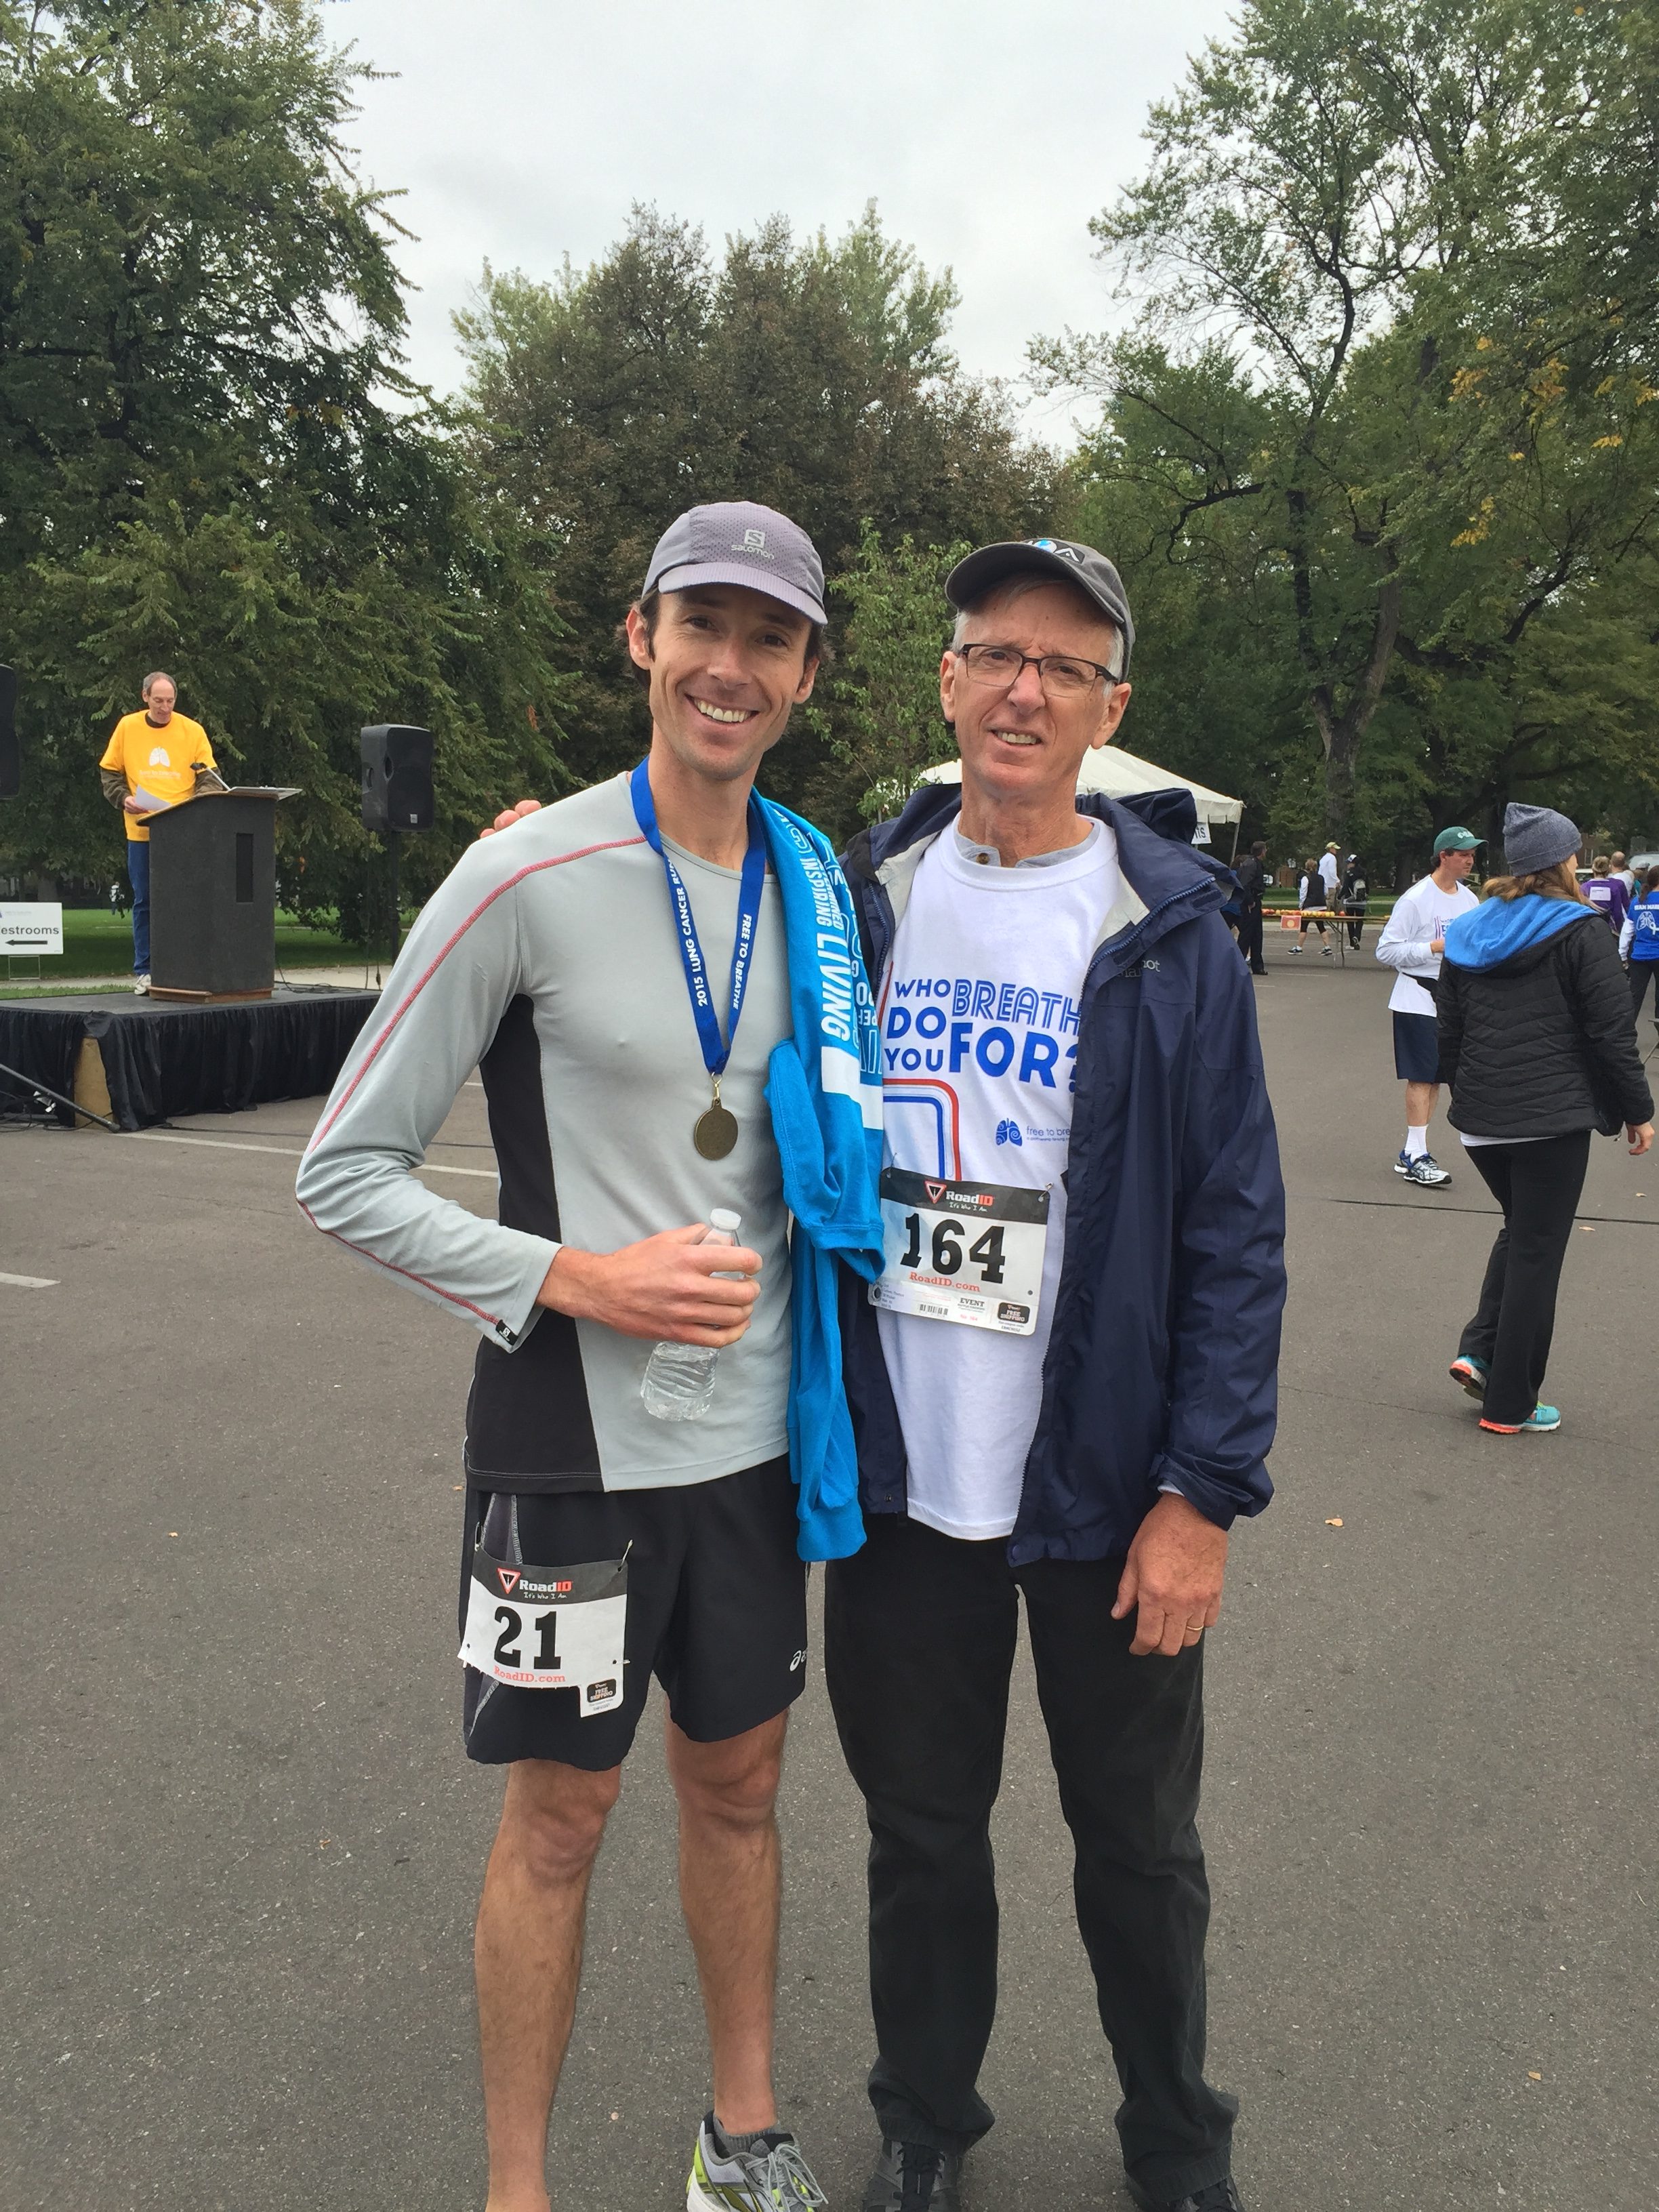 Ben and his dad at the Free to Breathe 5k run in Denver, Colorado